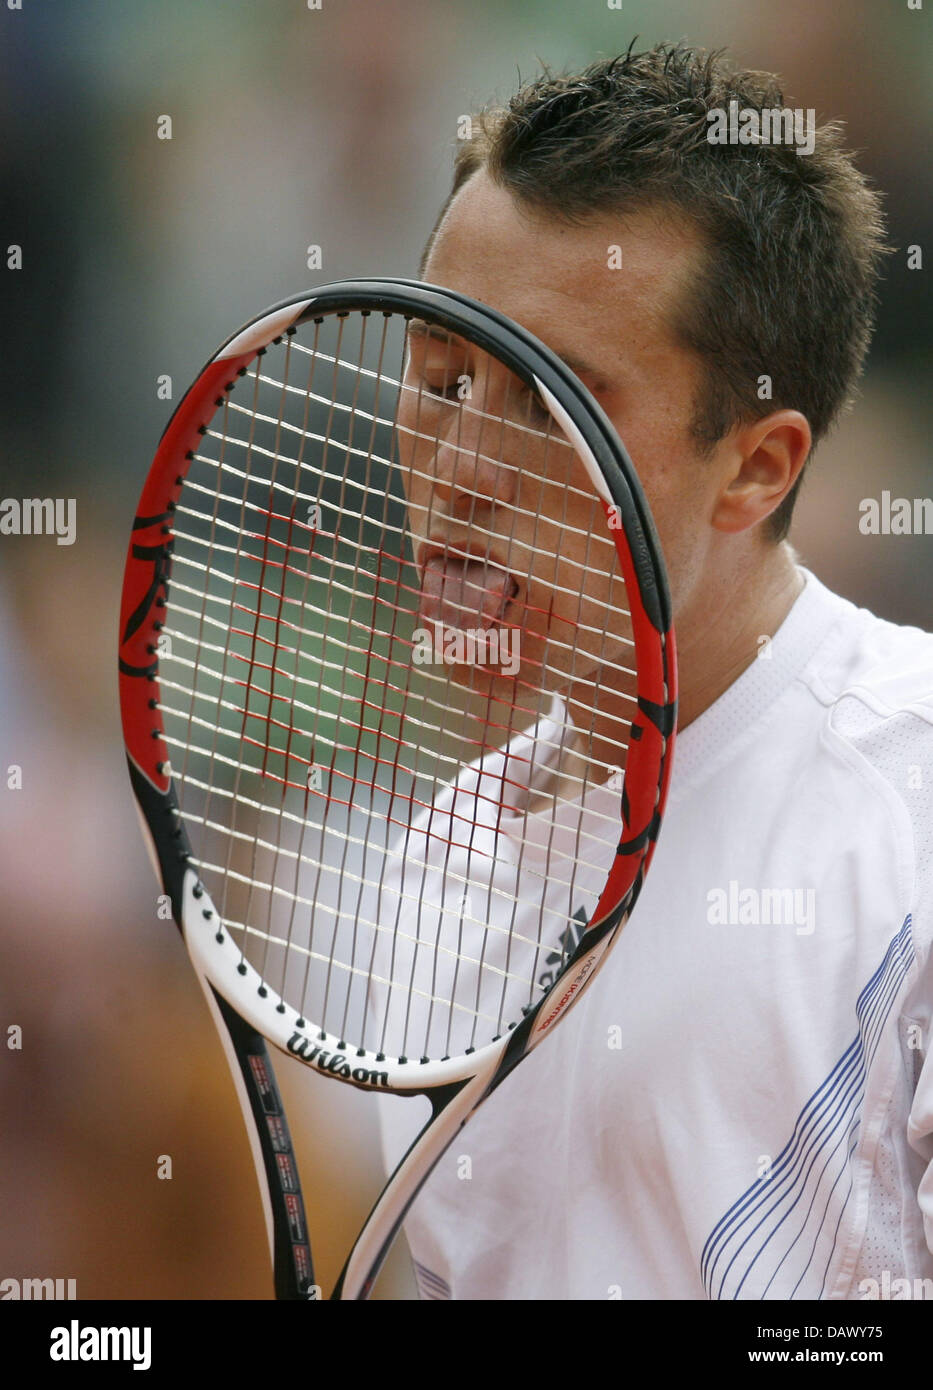 German tennis pro Philipp Kohlschreiber licks his racket during his match  against Baghdatis from Cyprus at the ATP Masters Hamburg Rothenbaum in  Hamburg, Germany, 14 May 2007. Kohlschreiber defeated Baghdatis 6-3 and